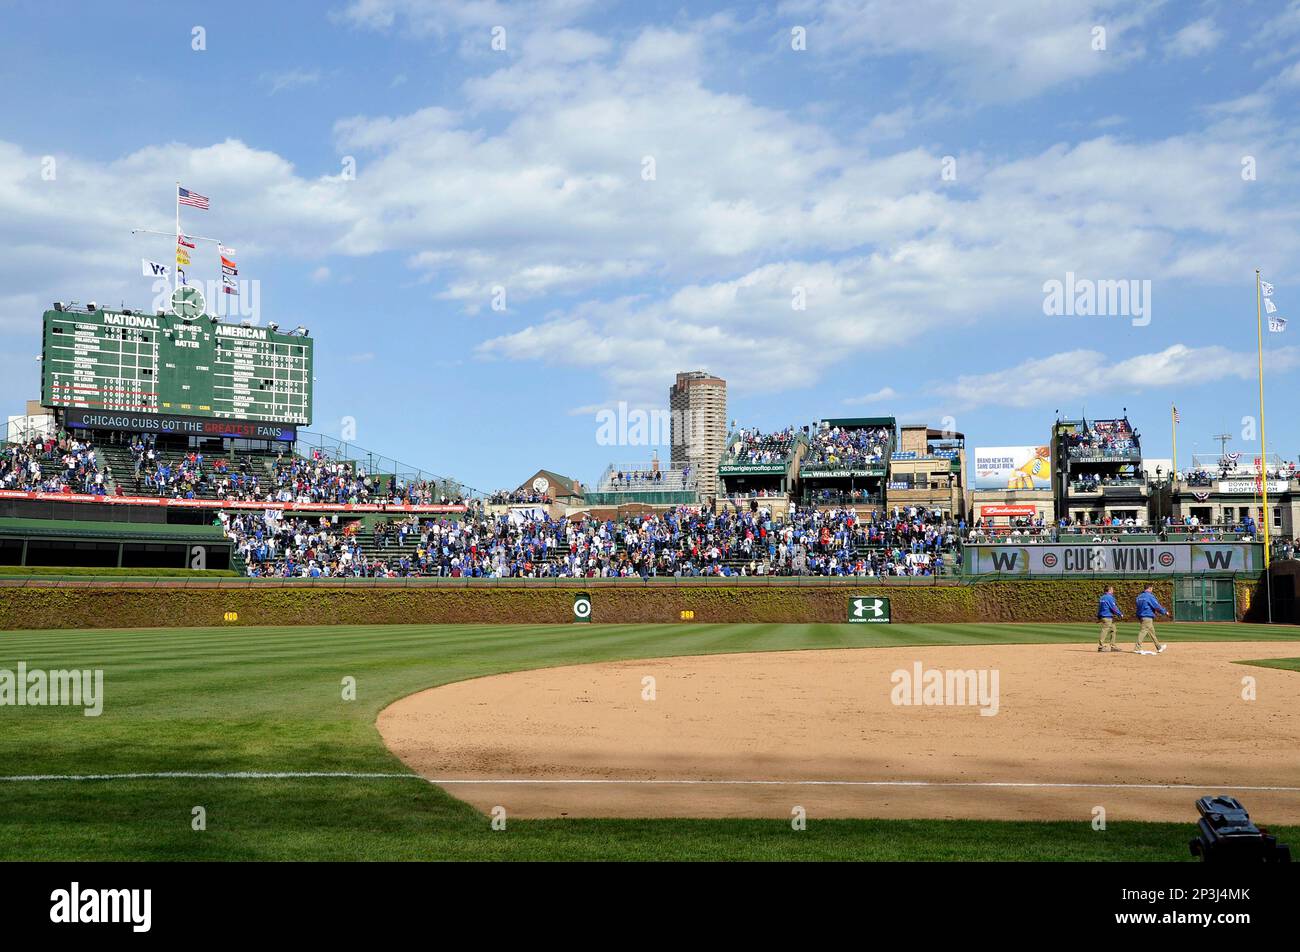 08 April 2012: A general view of the 'W' flag and the new video board  showing CUBS WIN after the Chicago Cubs defeated the Washington Nationals,  by the score of 4-3, at